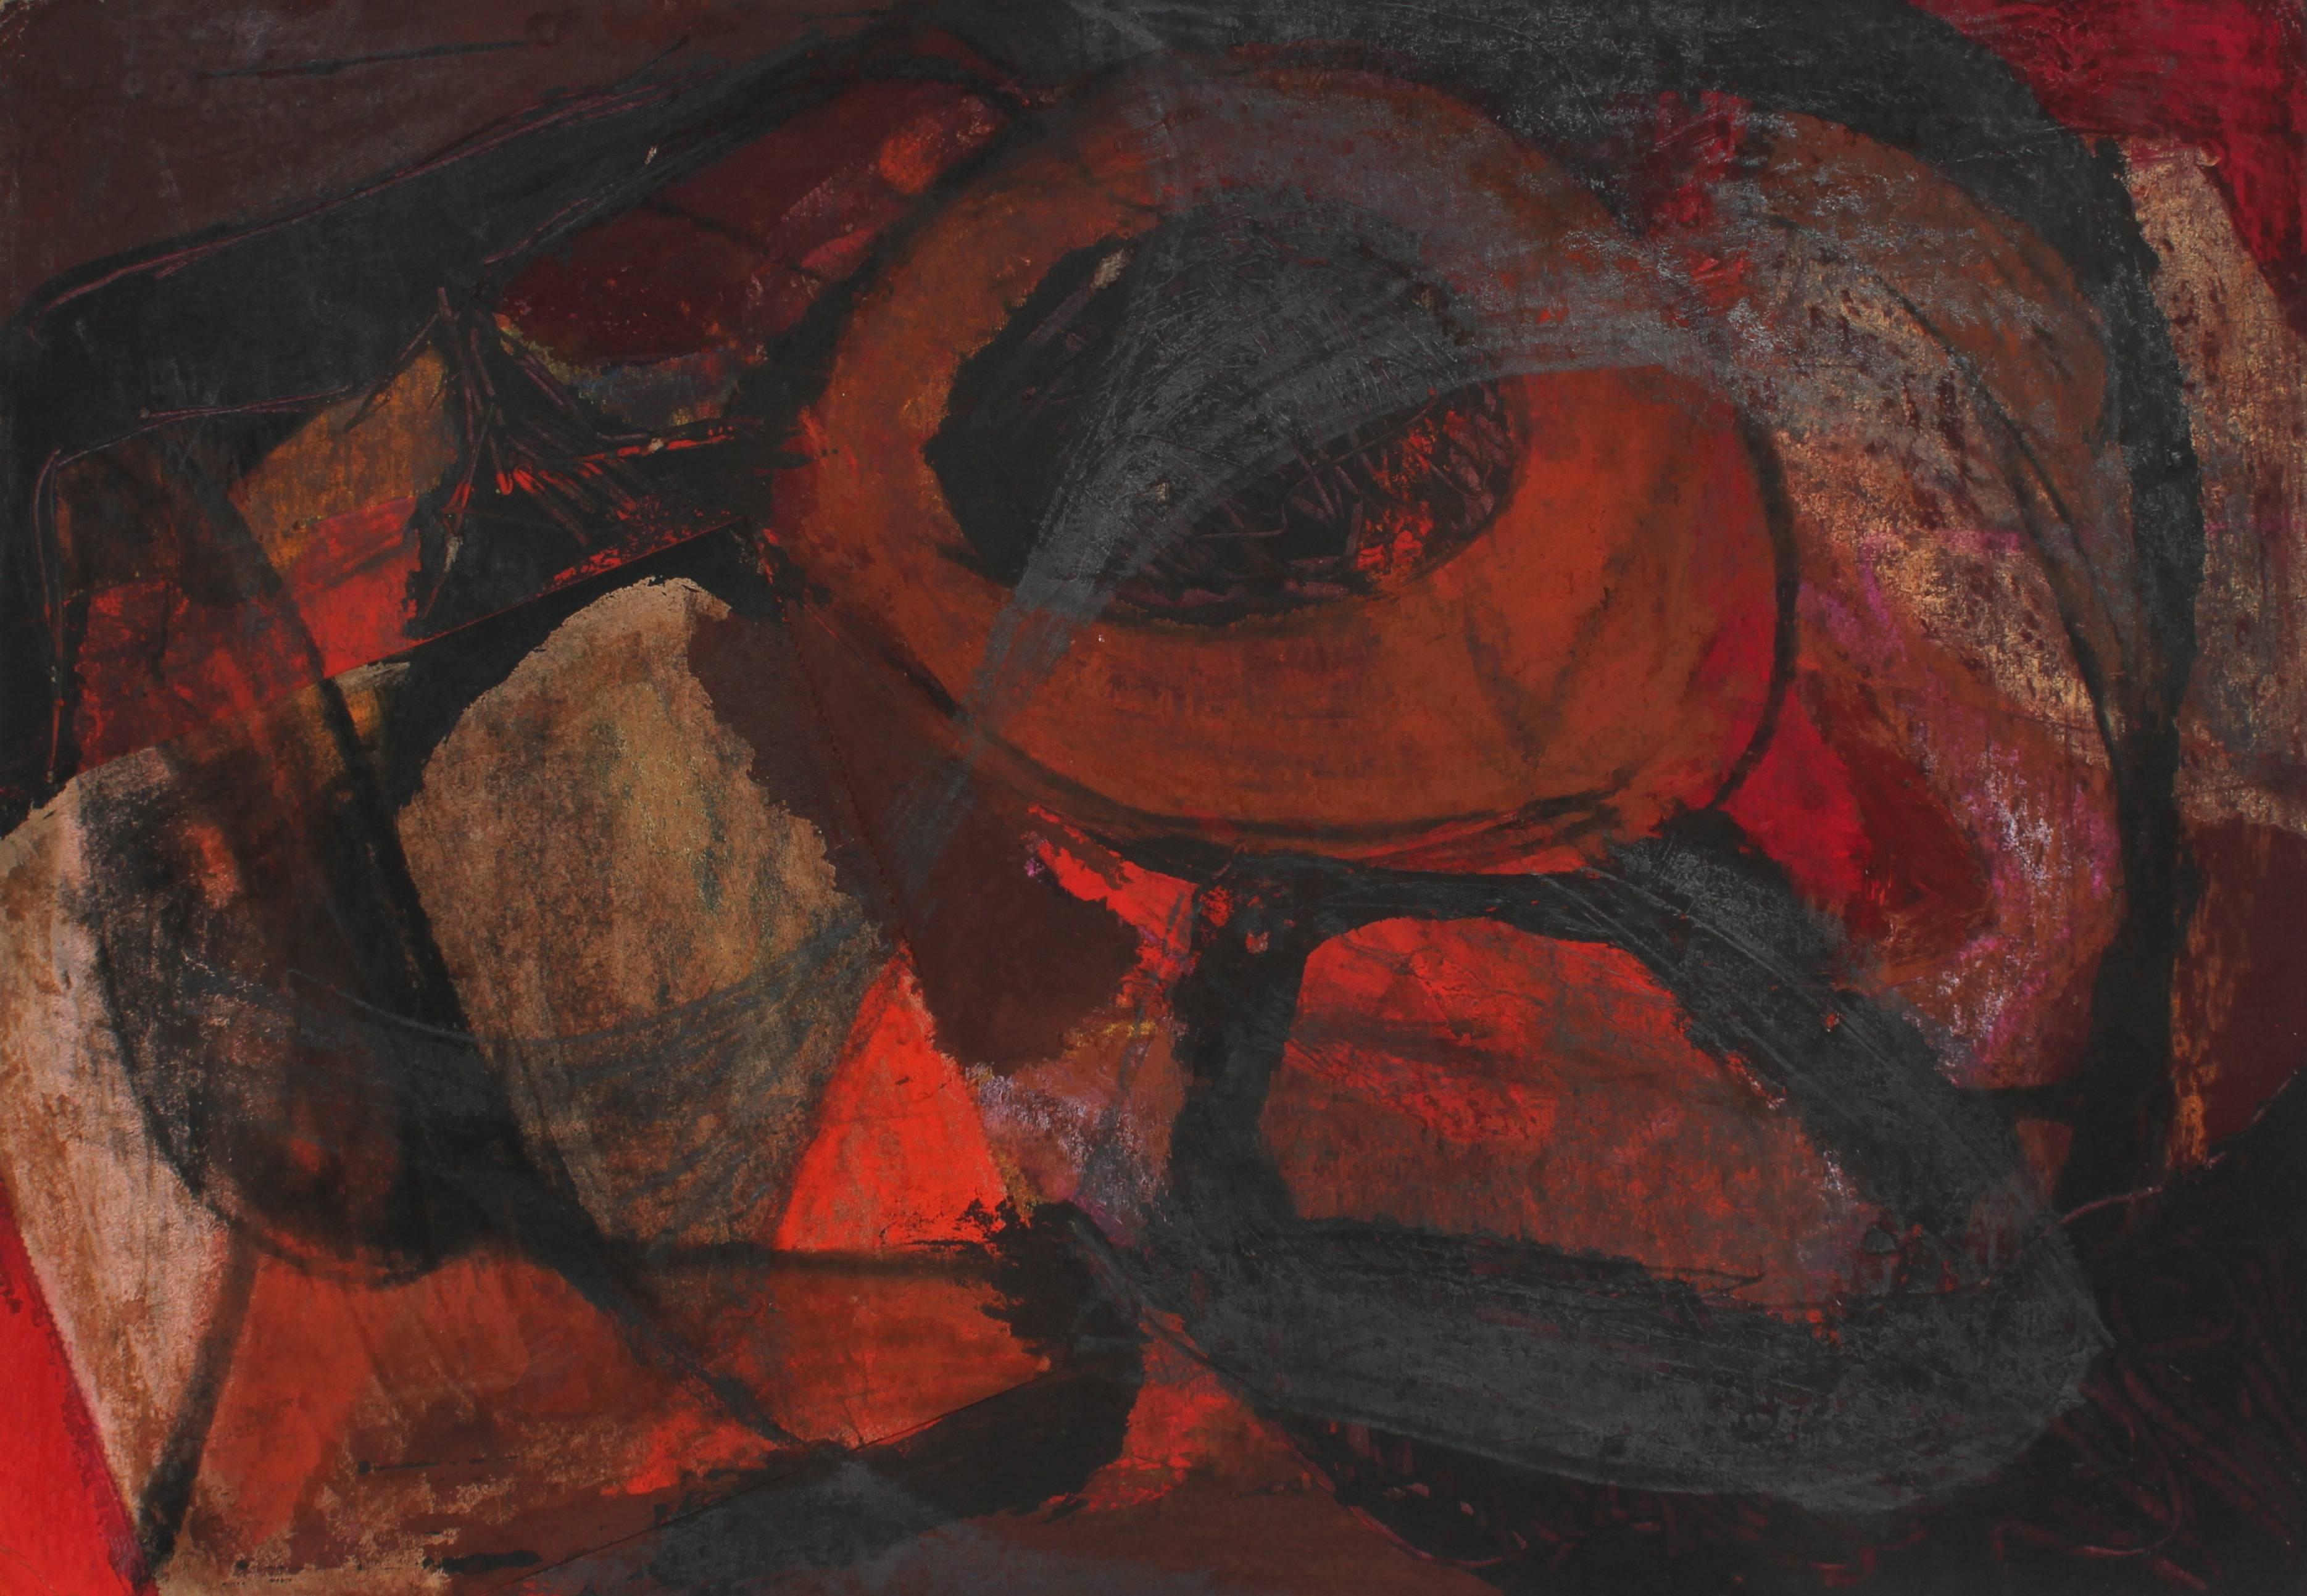 Jack Freeman Abstract Drawing - Abstract Expressionist Painting in Red and Black, Circa 1960s